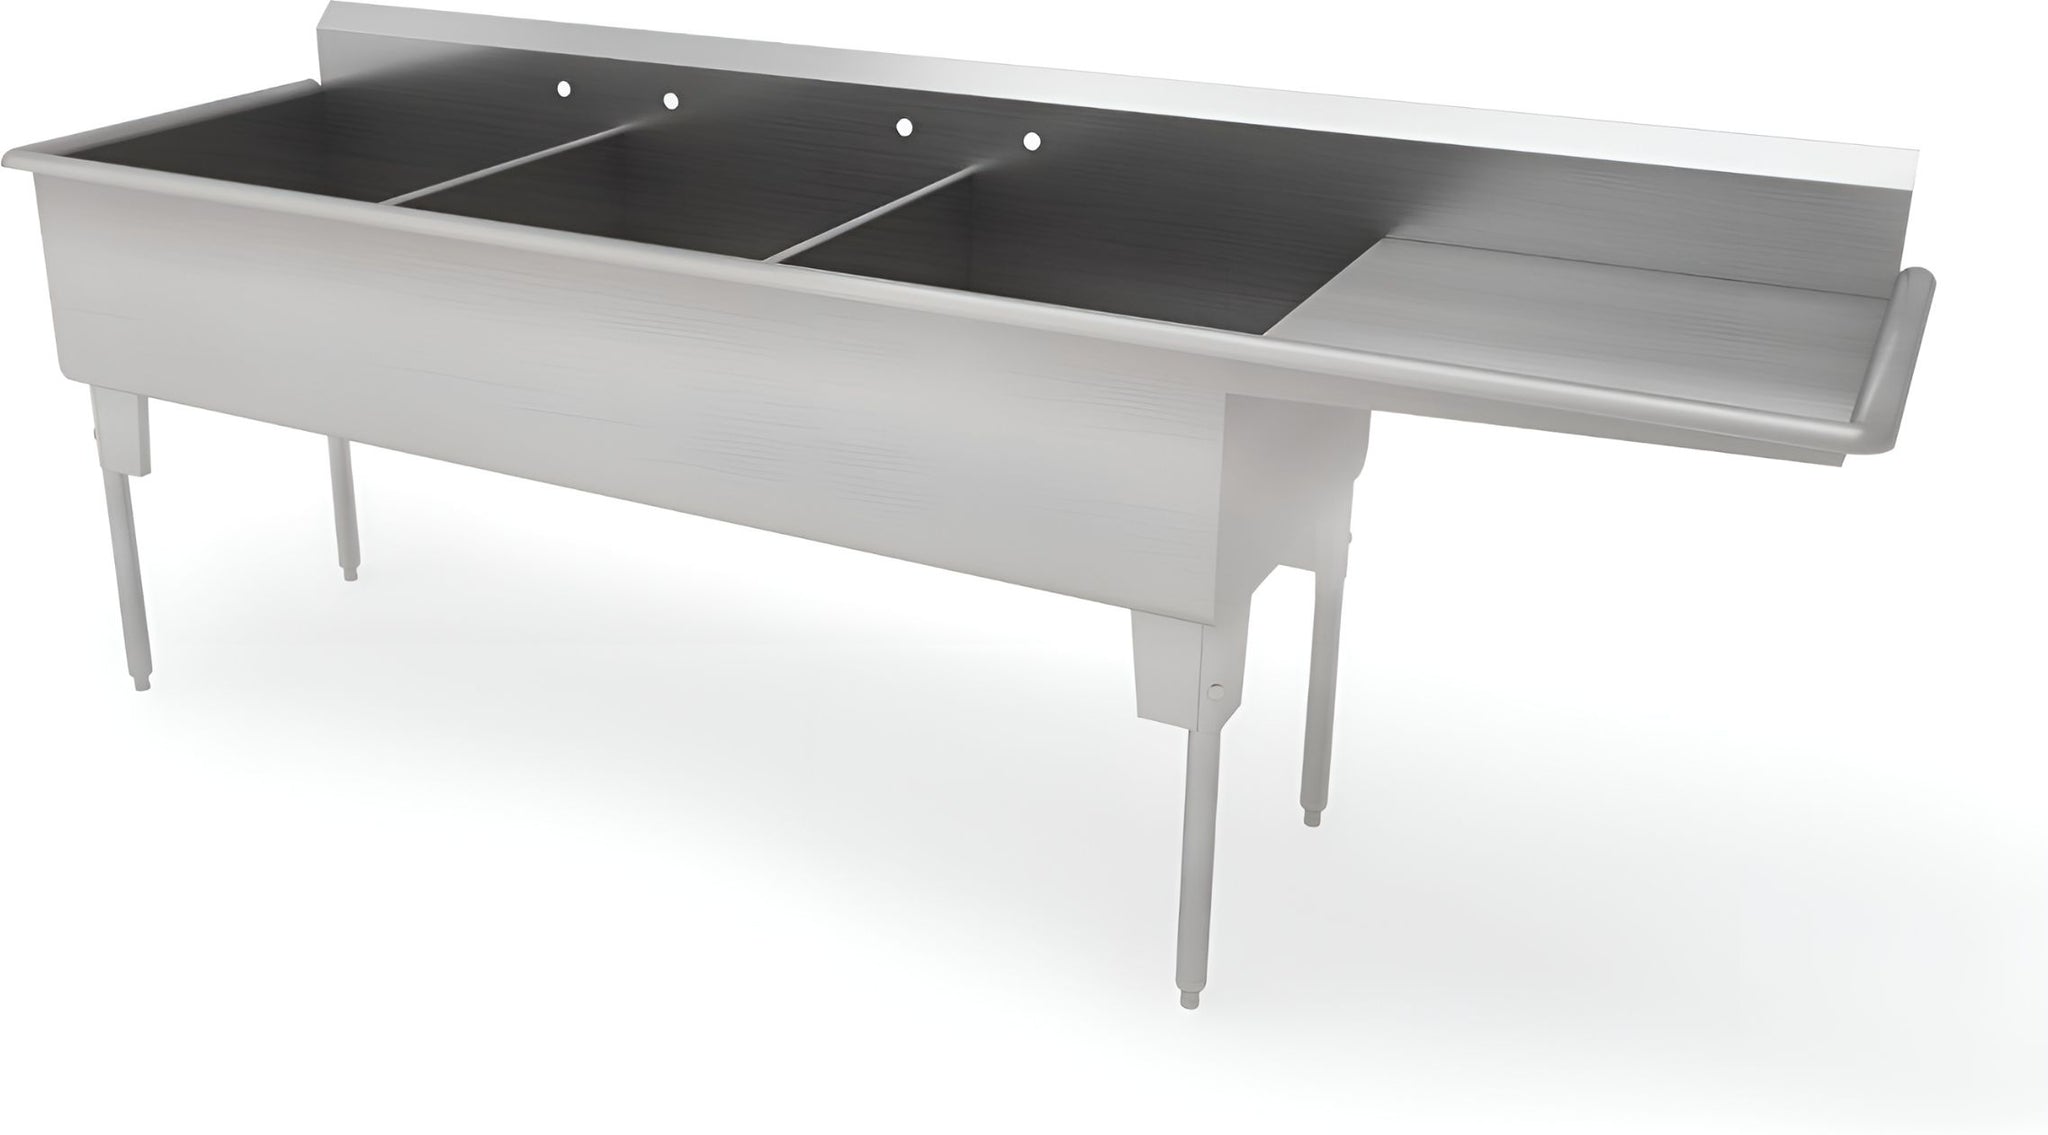 Franesse - 24" x 54" x 14" Stainless Steel Triple Compartment Sink With Drainboard - T2454-14DL24-O